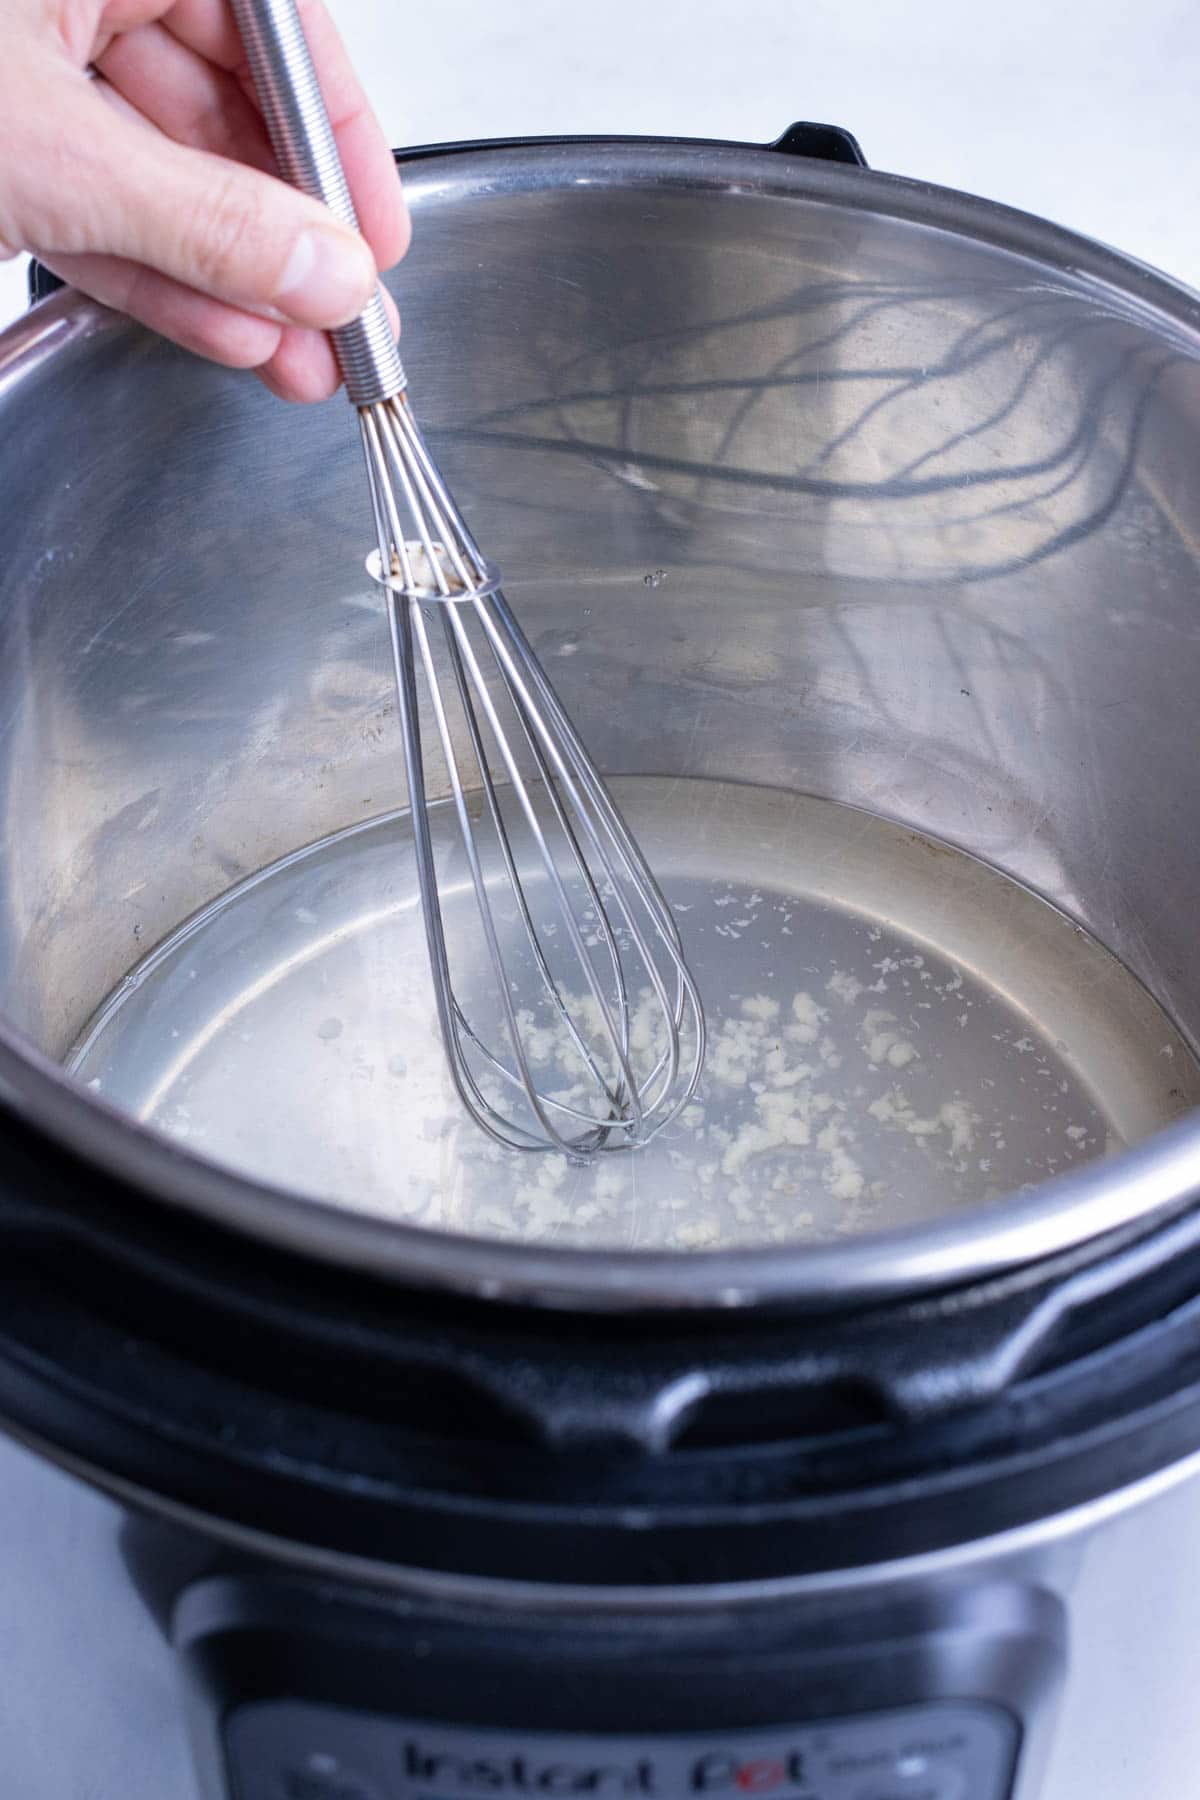 Water, vinegar, and sugar are whisked together in the pressure cooker.